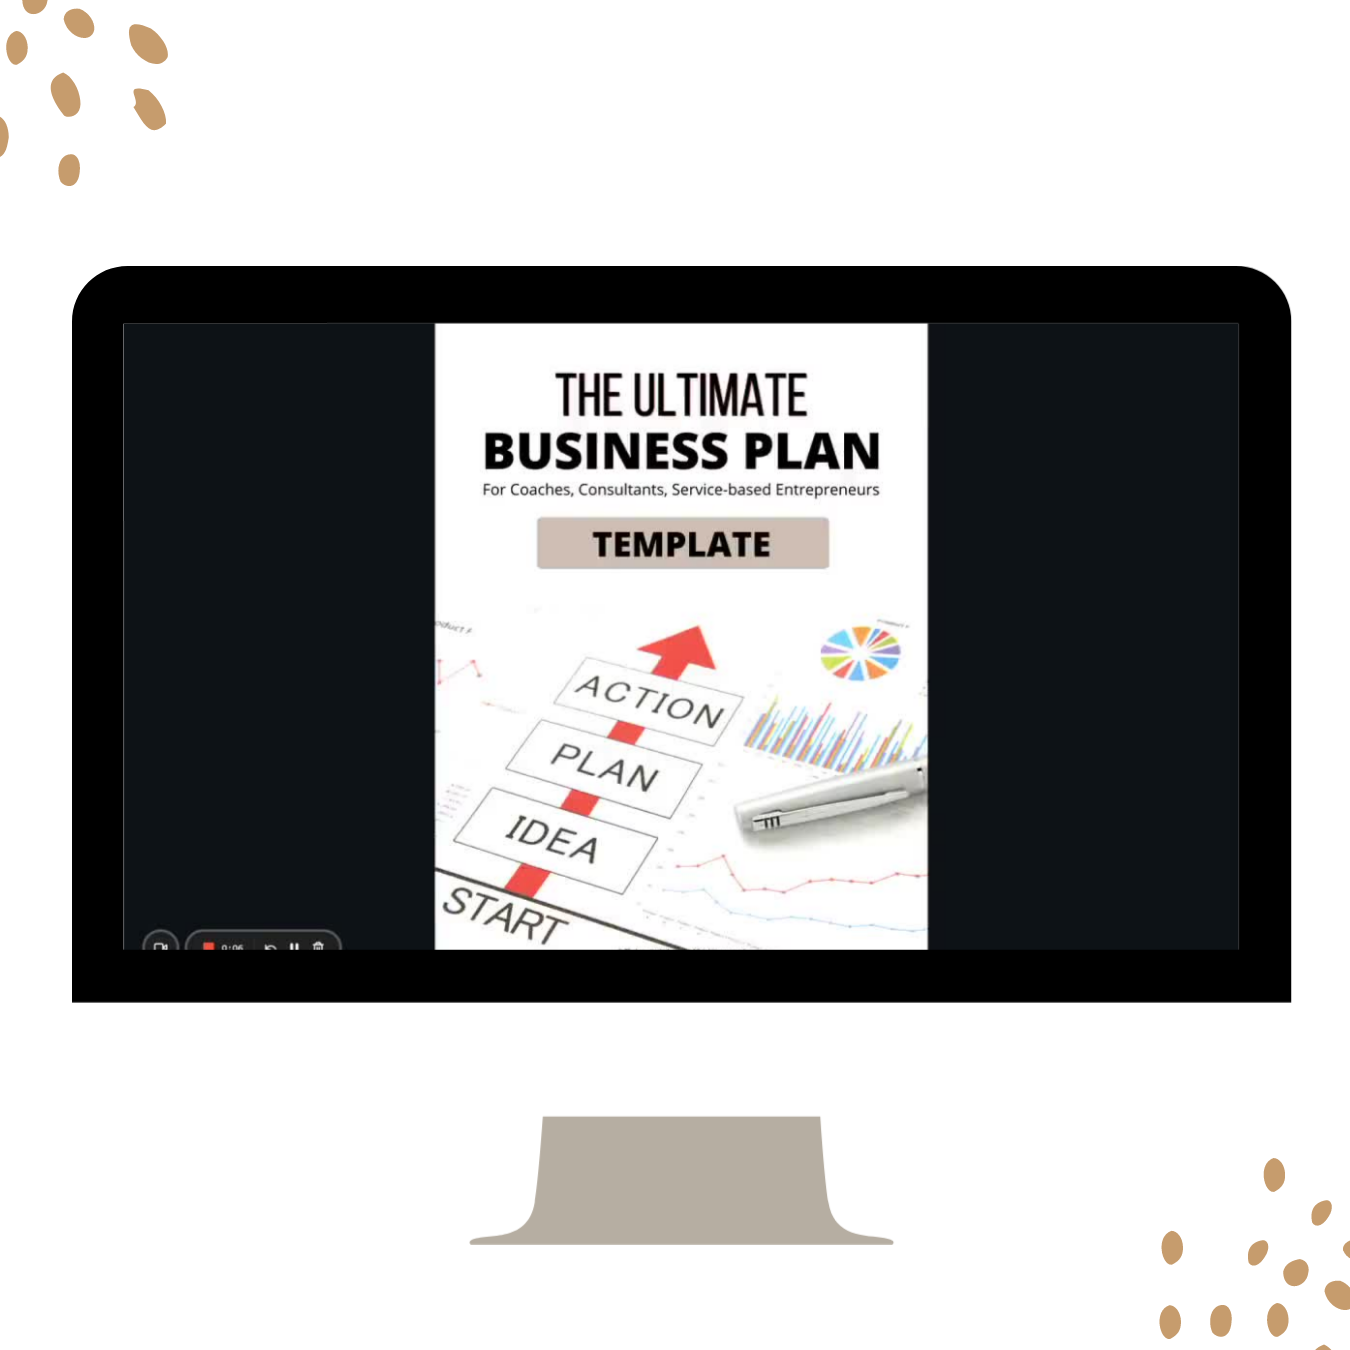 The Ultimate Business Plan Template